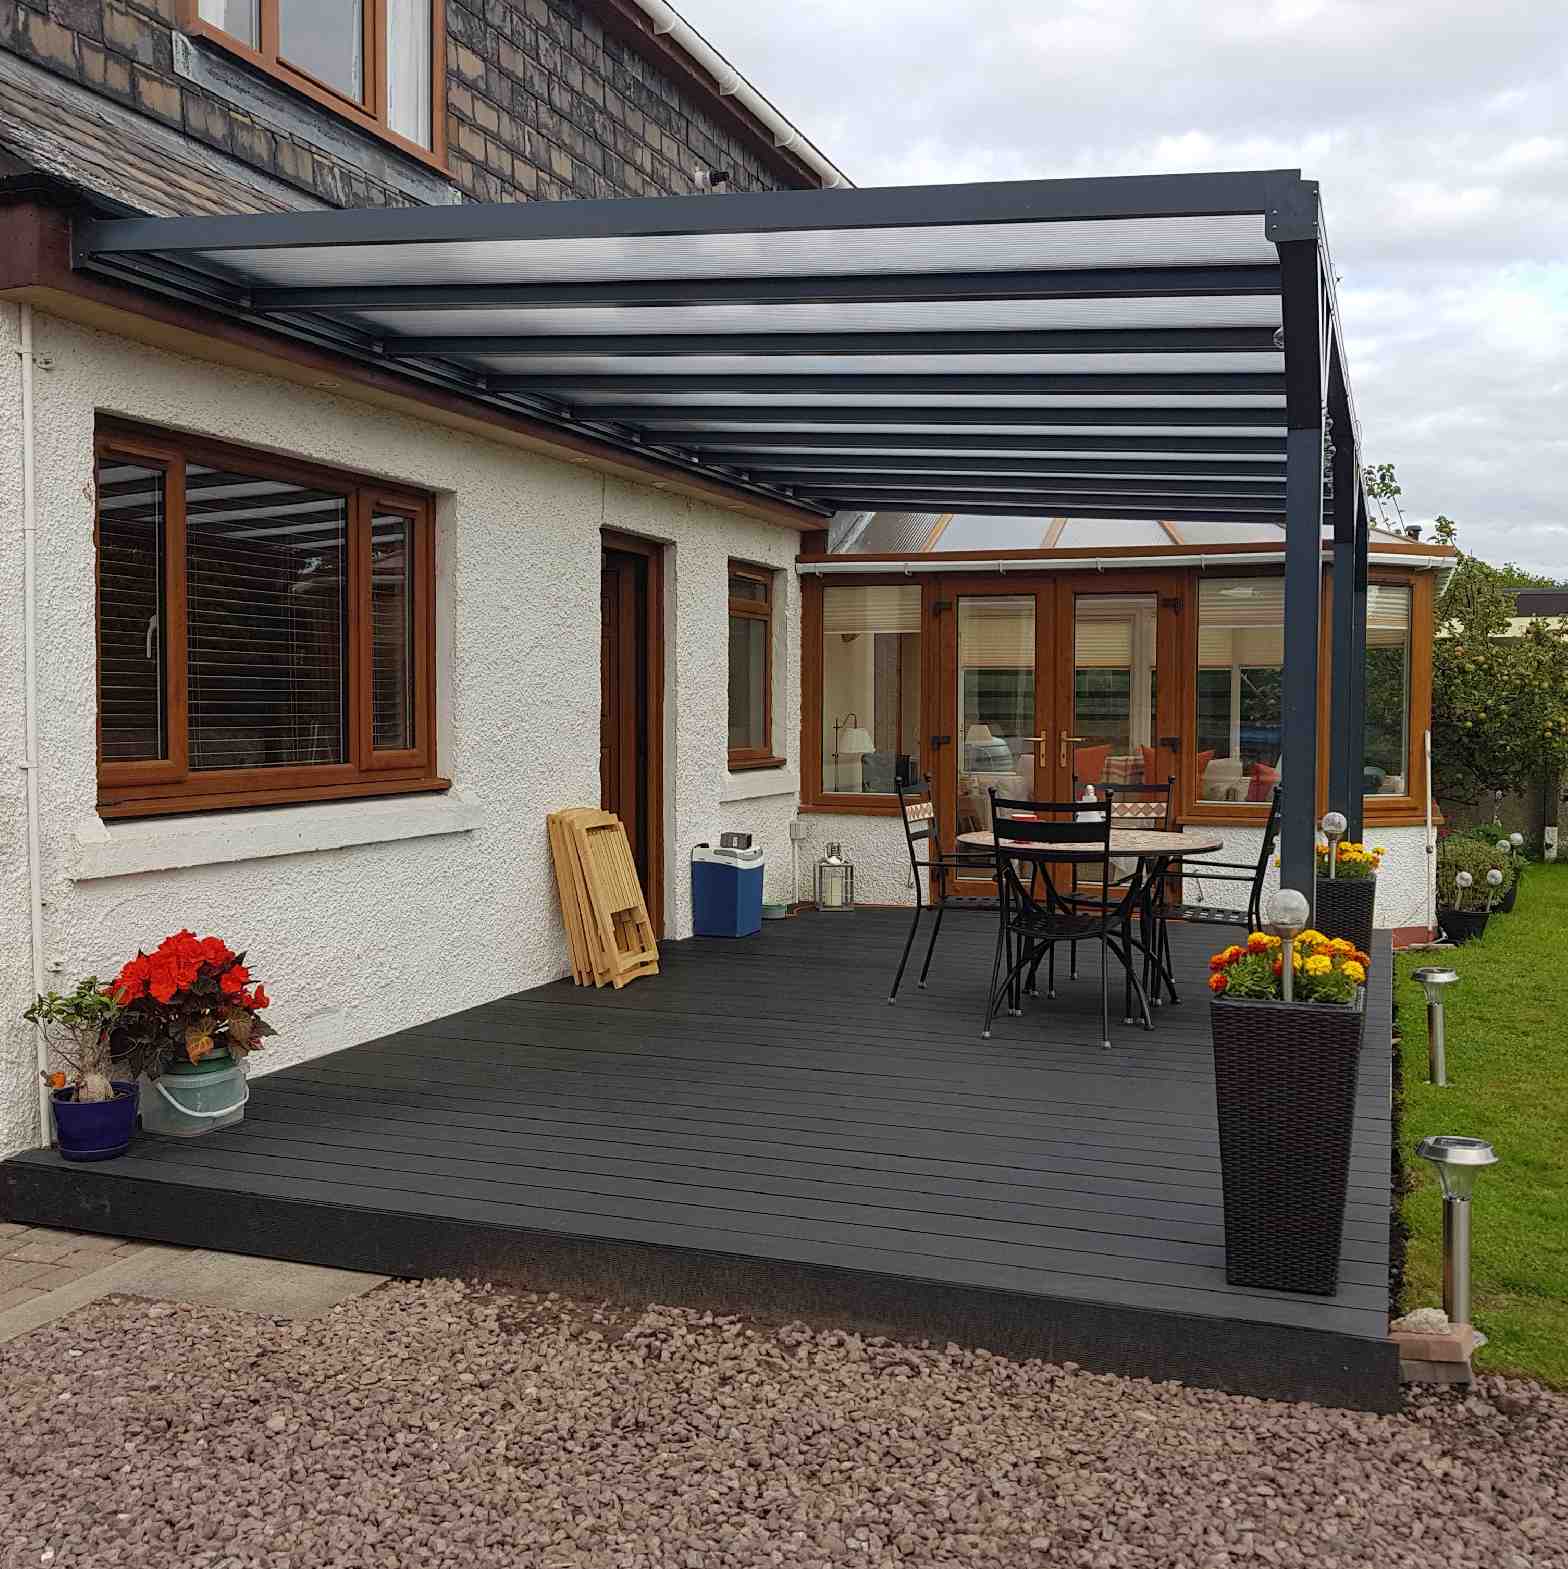 Buy Omega Verandah, Anthracite Grey, 16mm Polycarbonate Glazing - 11.2m (W) x 4.5m (P), (5) Supporting Posts online today